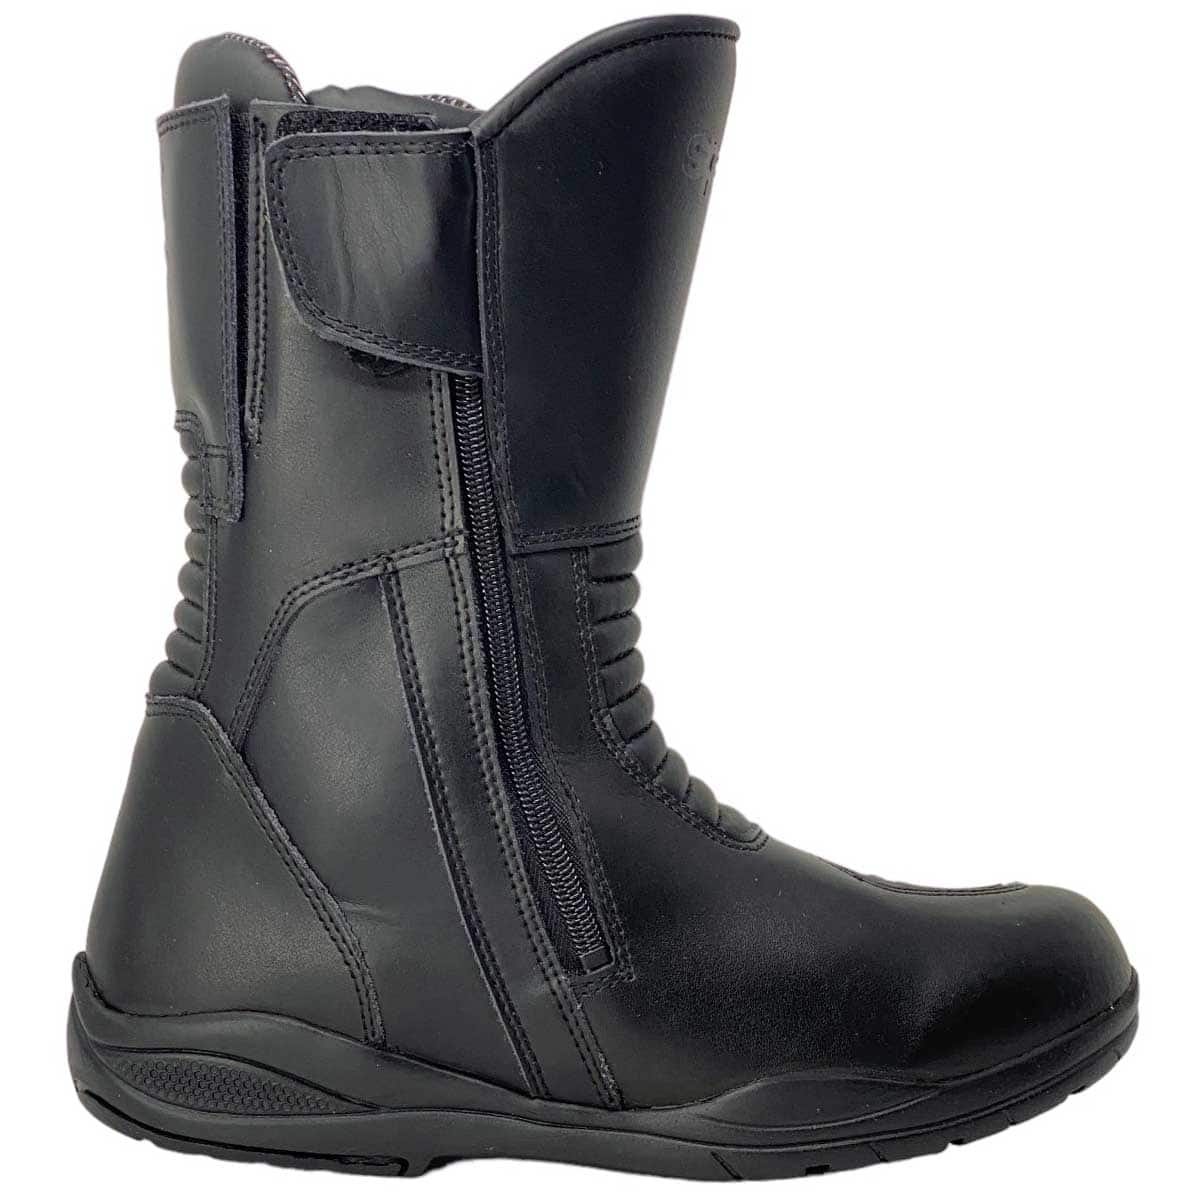 Spada Hurricane 3 CE WP Boots Specifications - Side